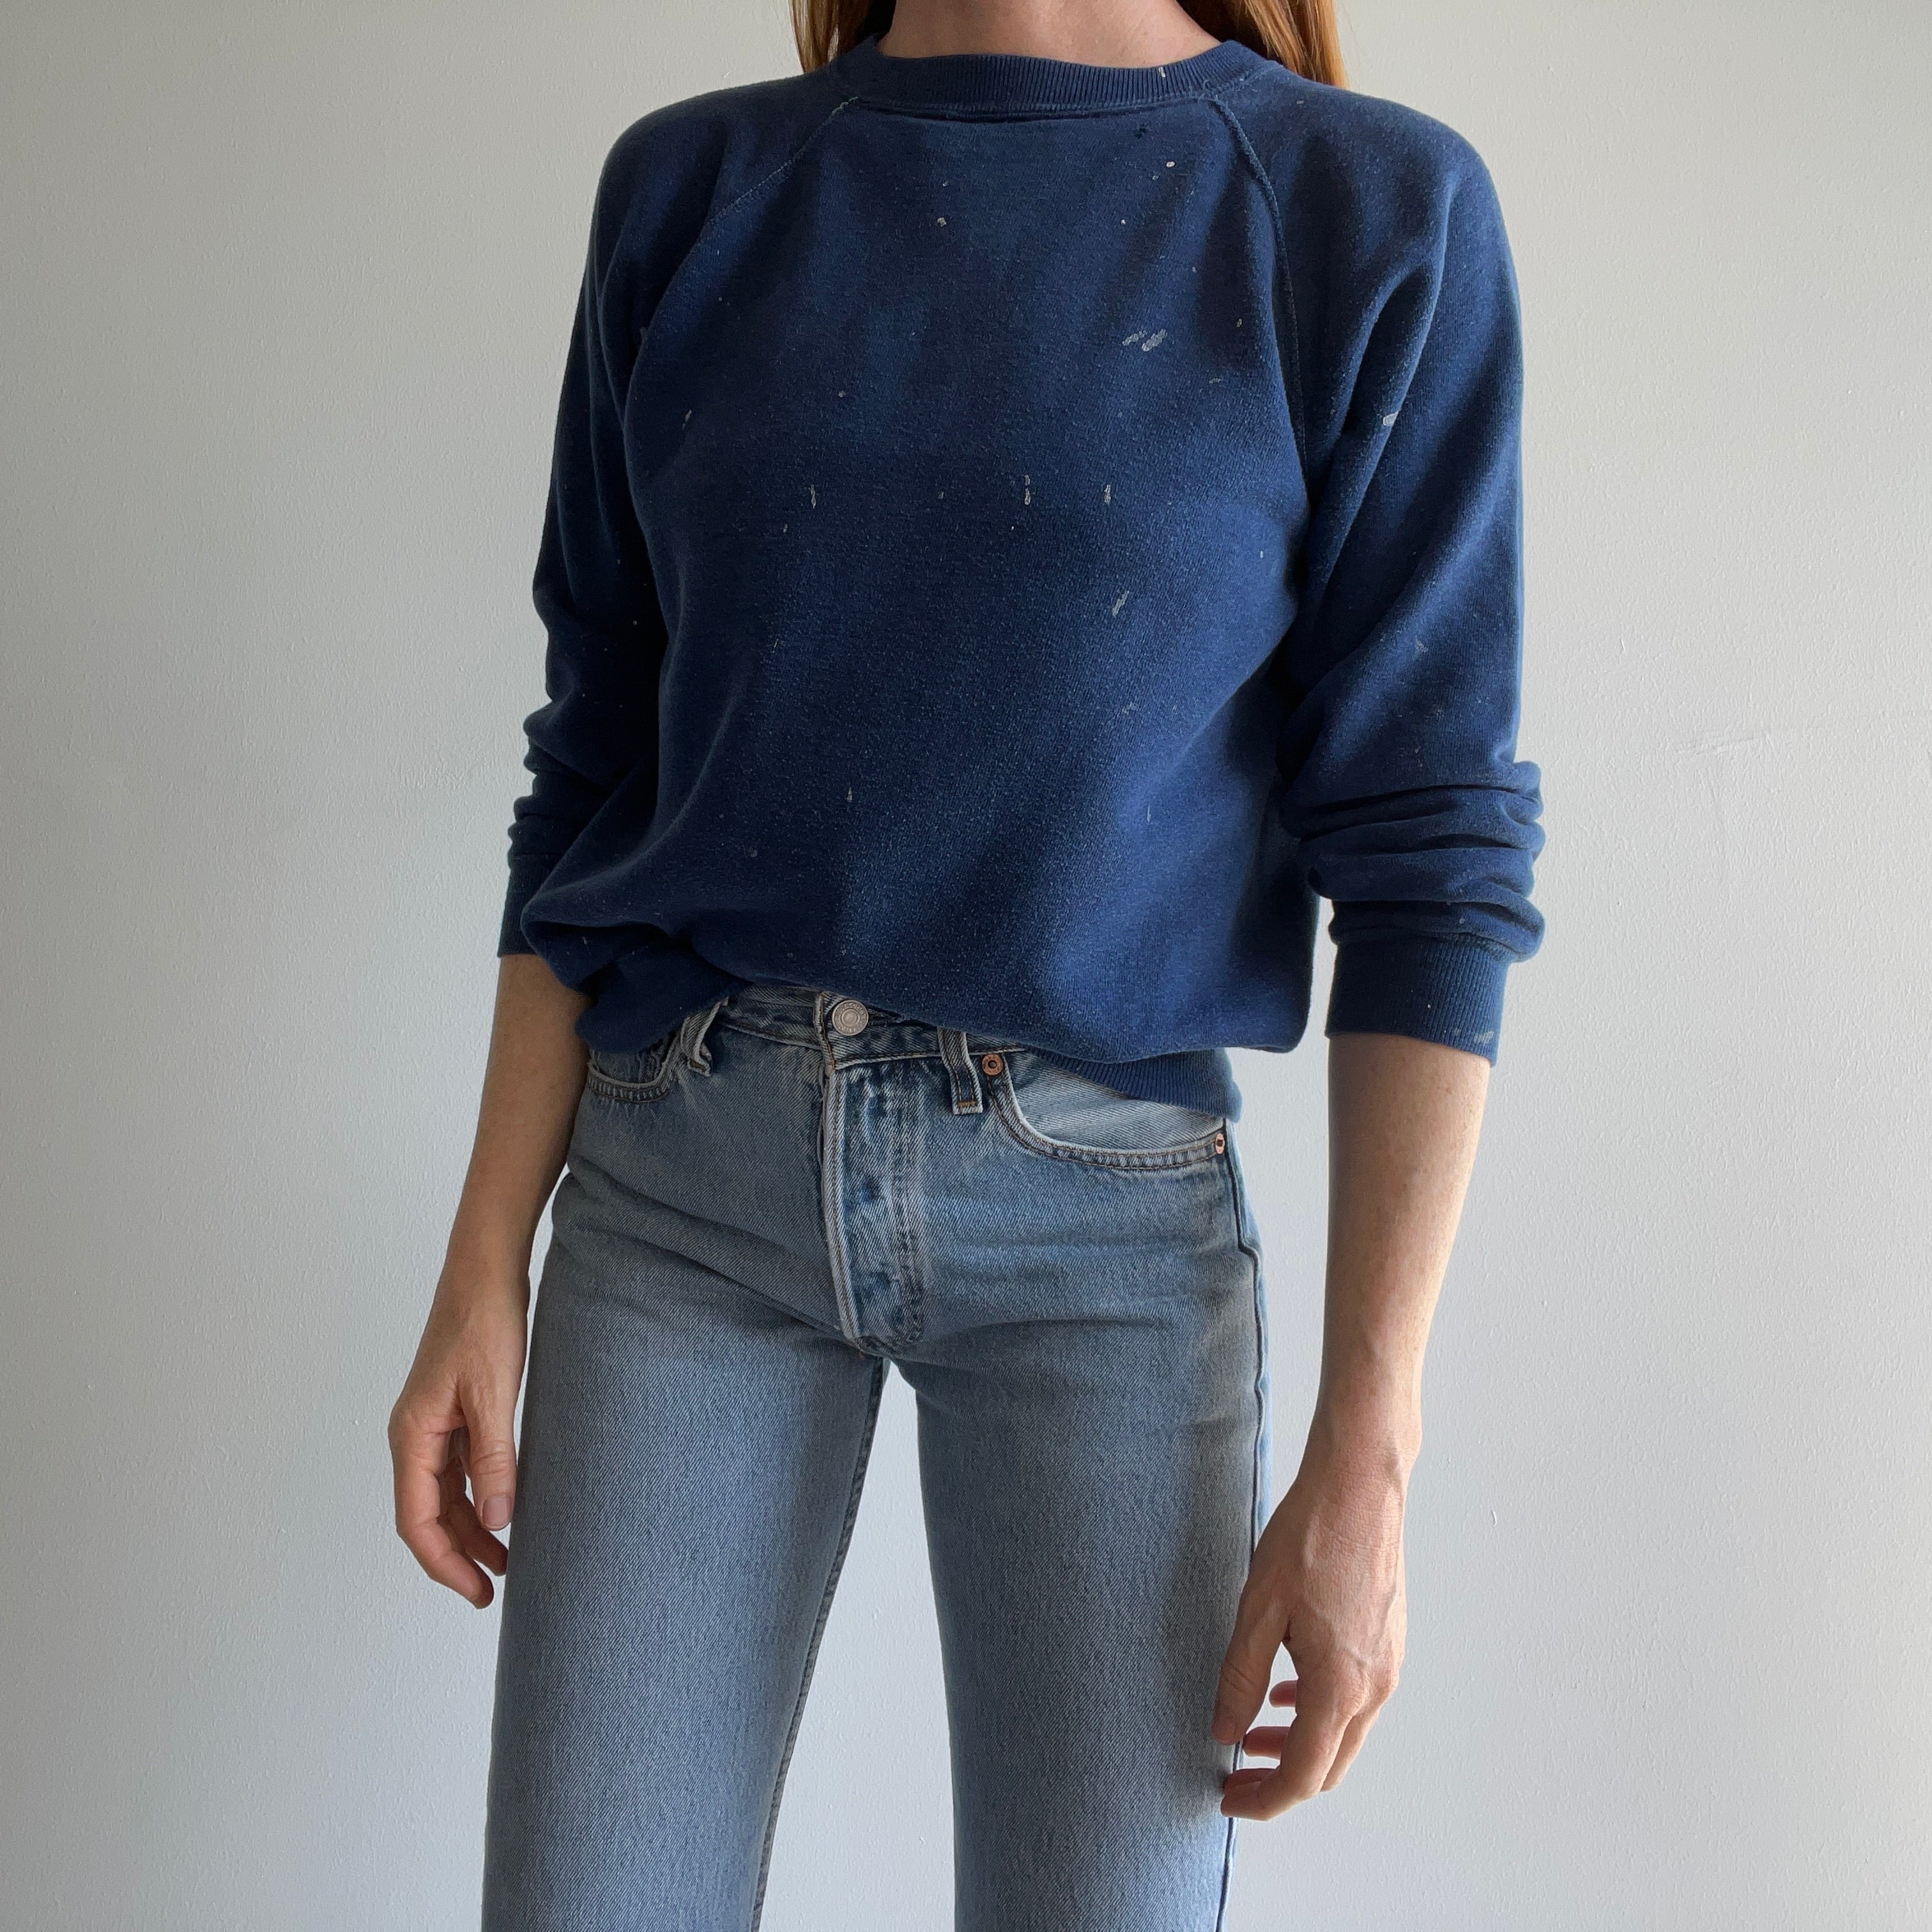 1970s Smaller Paint Stained Mostly Cotton Raglan Sweatshirt - Oh My!